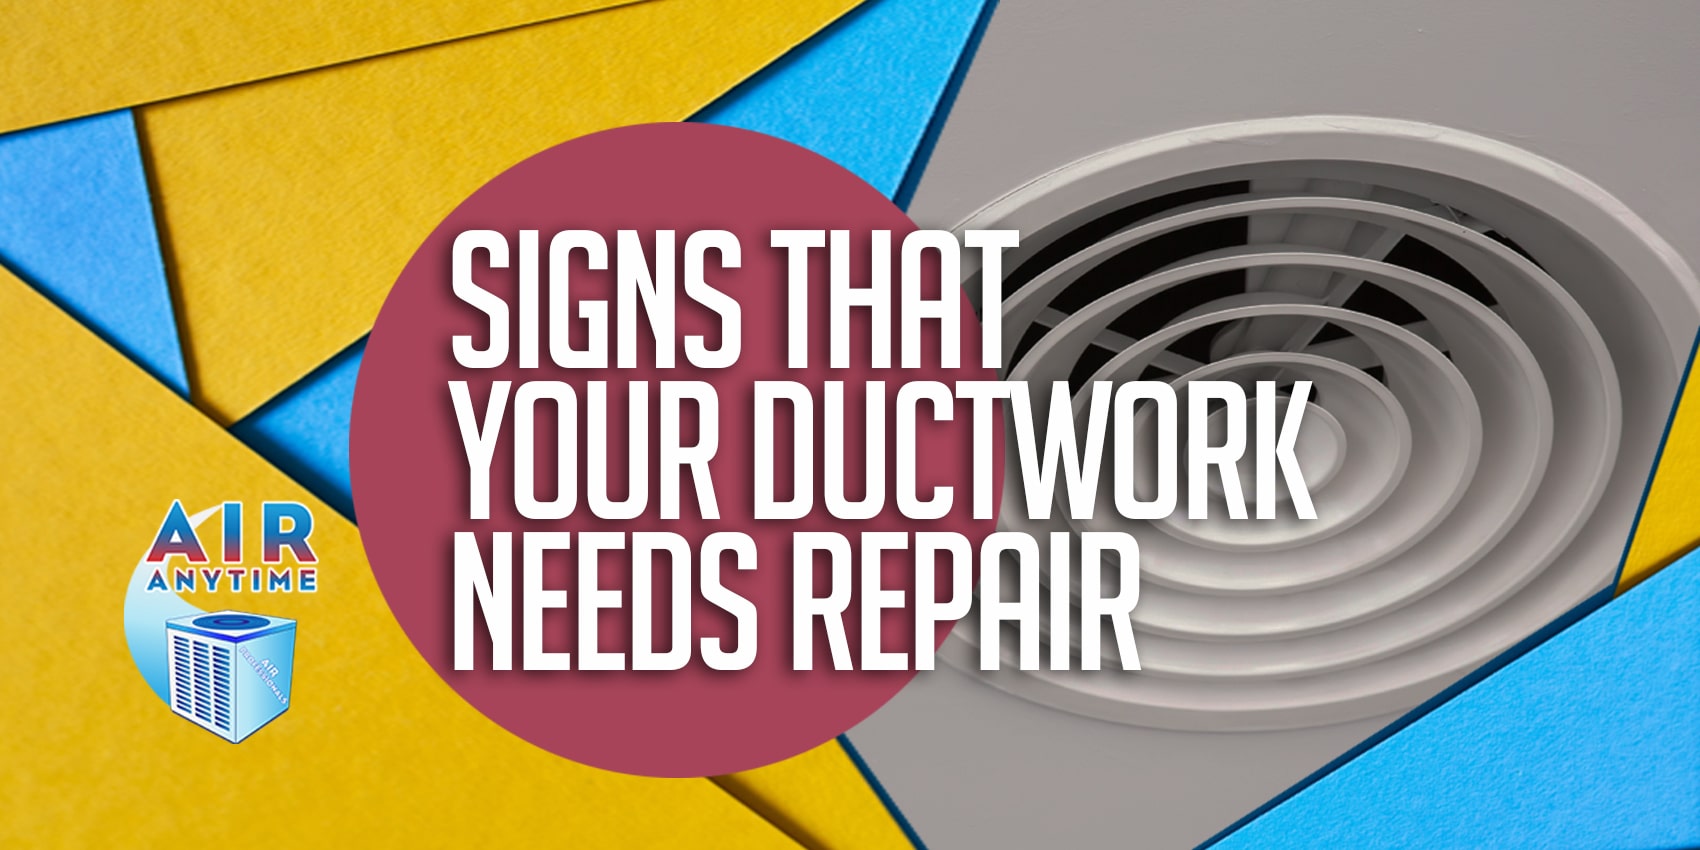 Signs That Your Ductwork Needs Repair